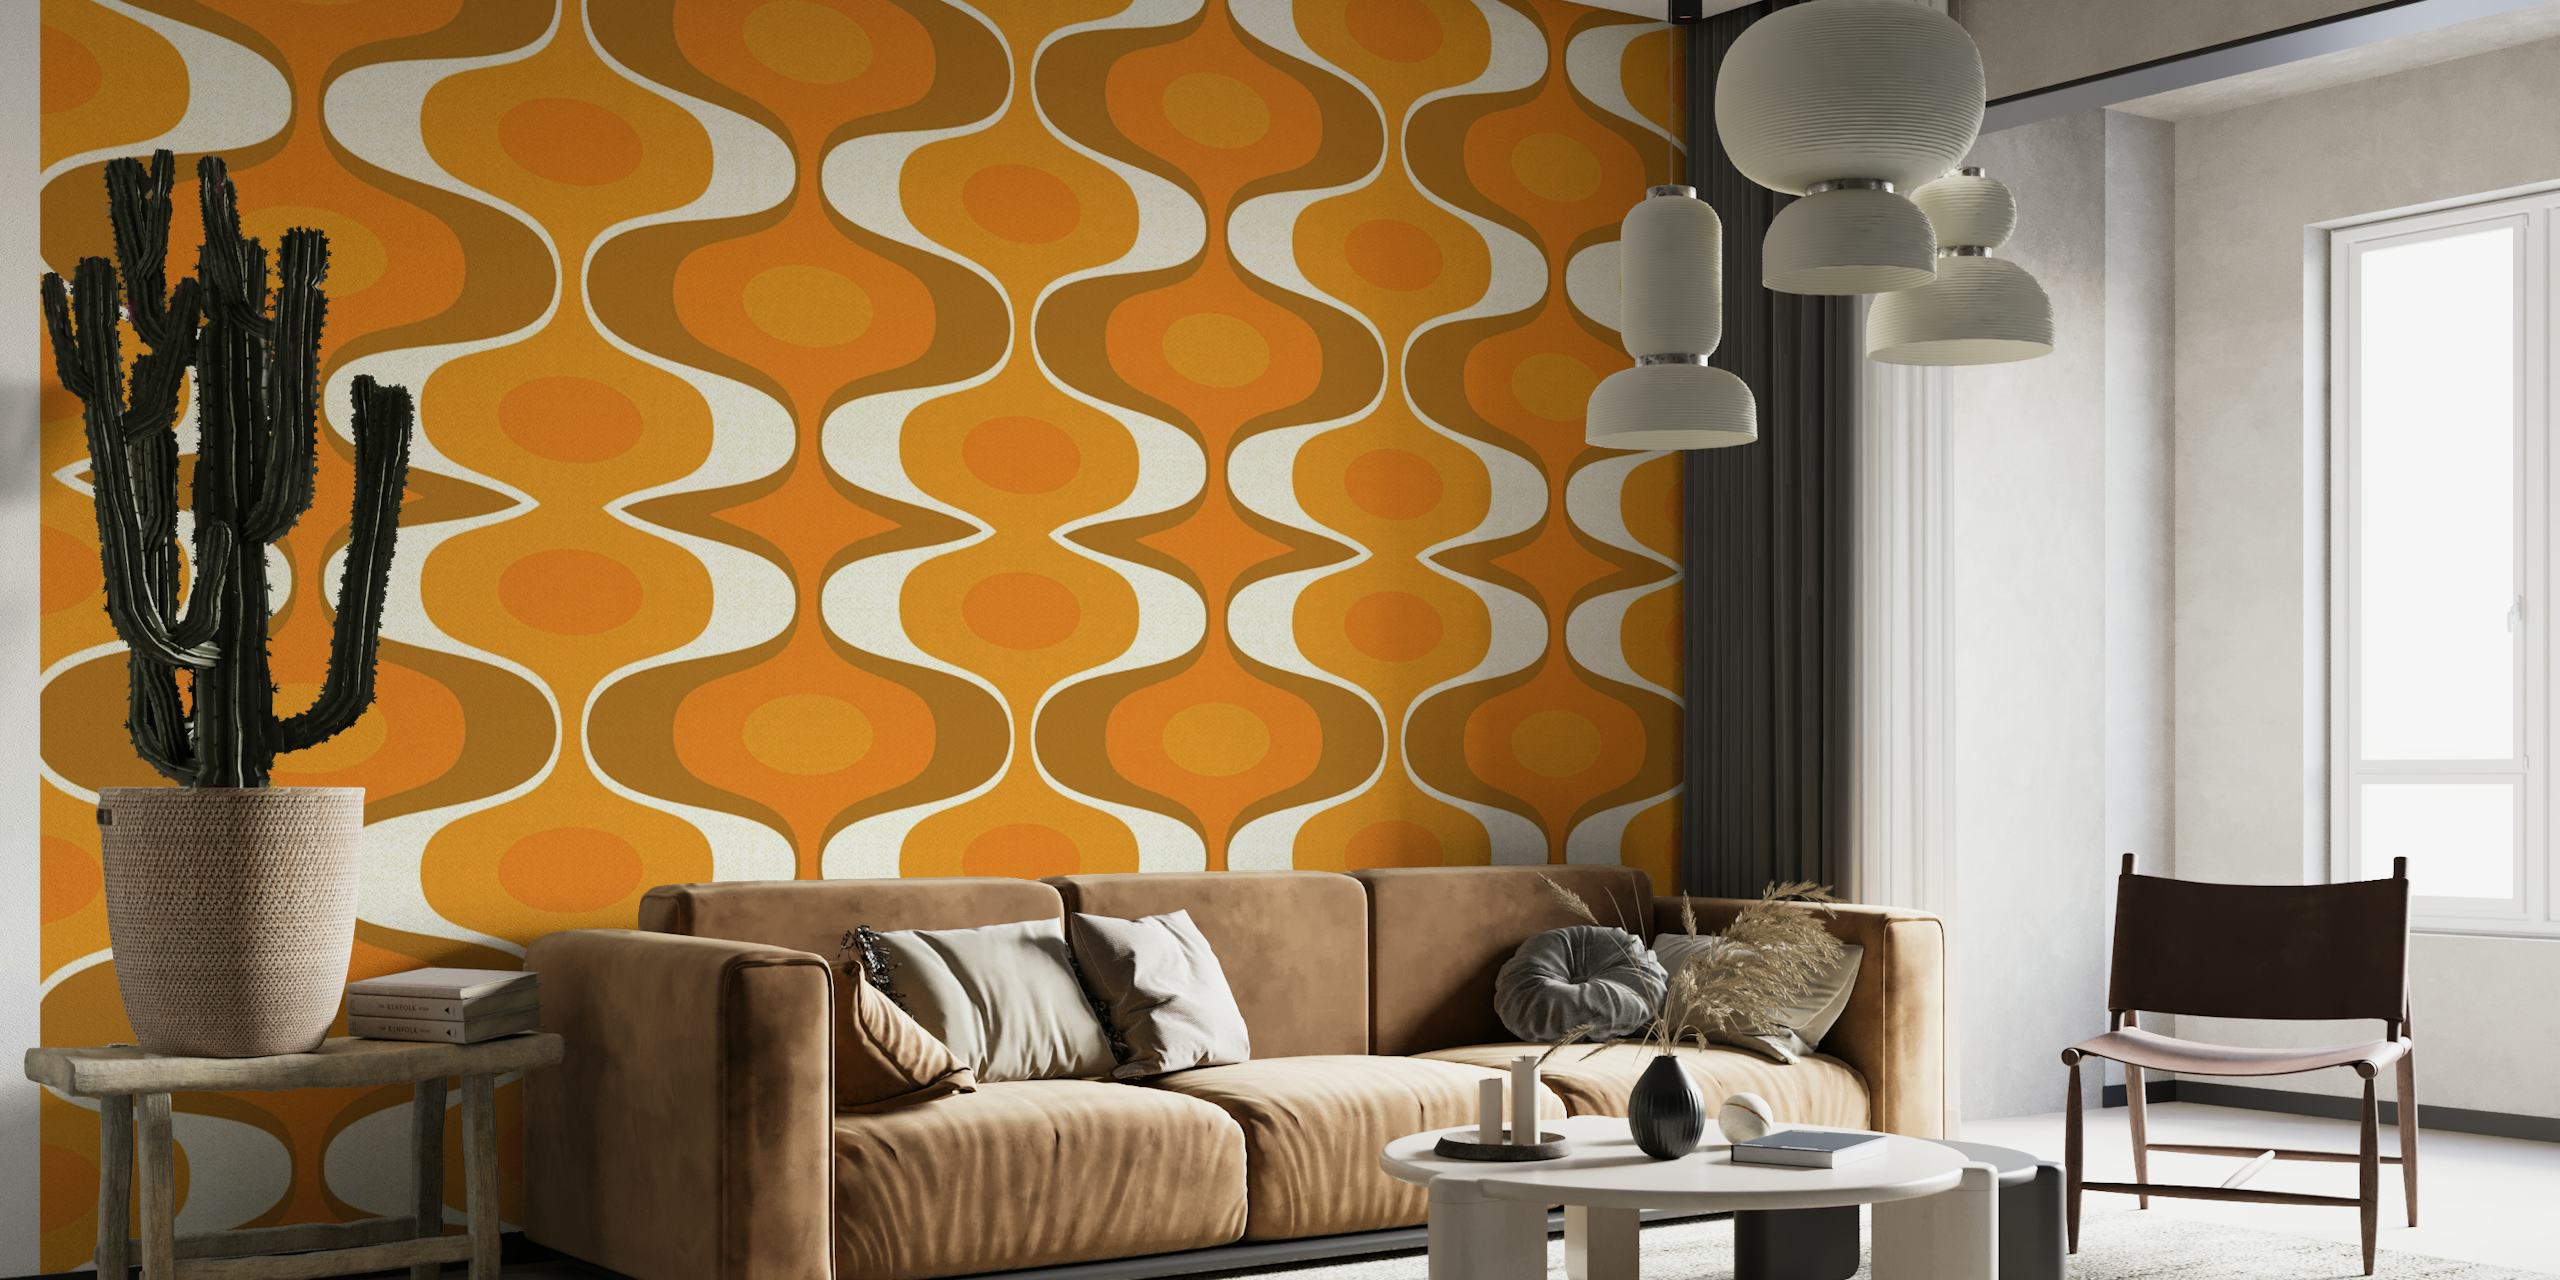 Geometric pattern wall mural with orange and earthy tones reflecting 70s retro style